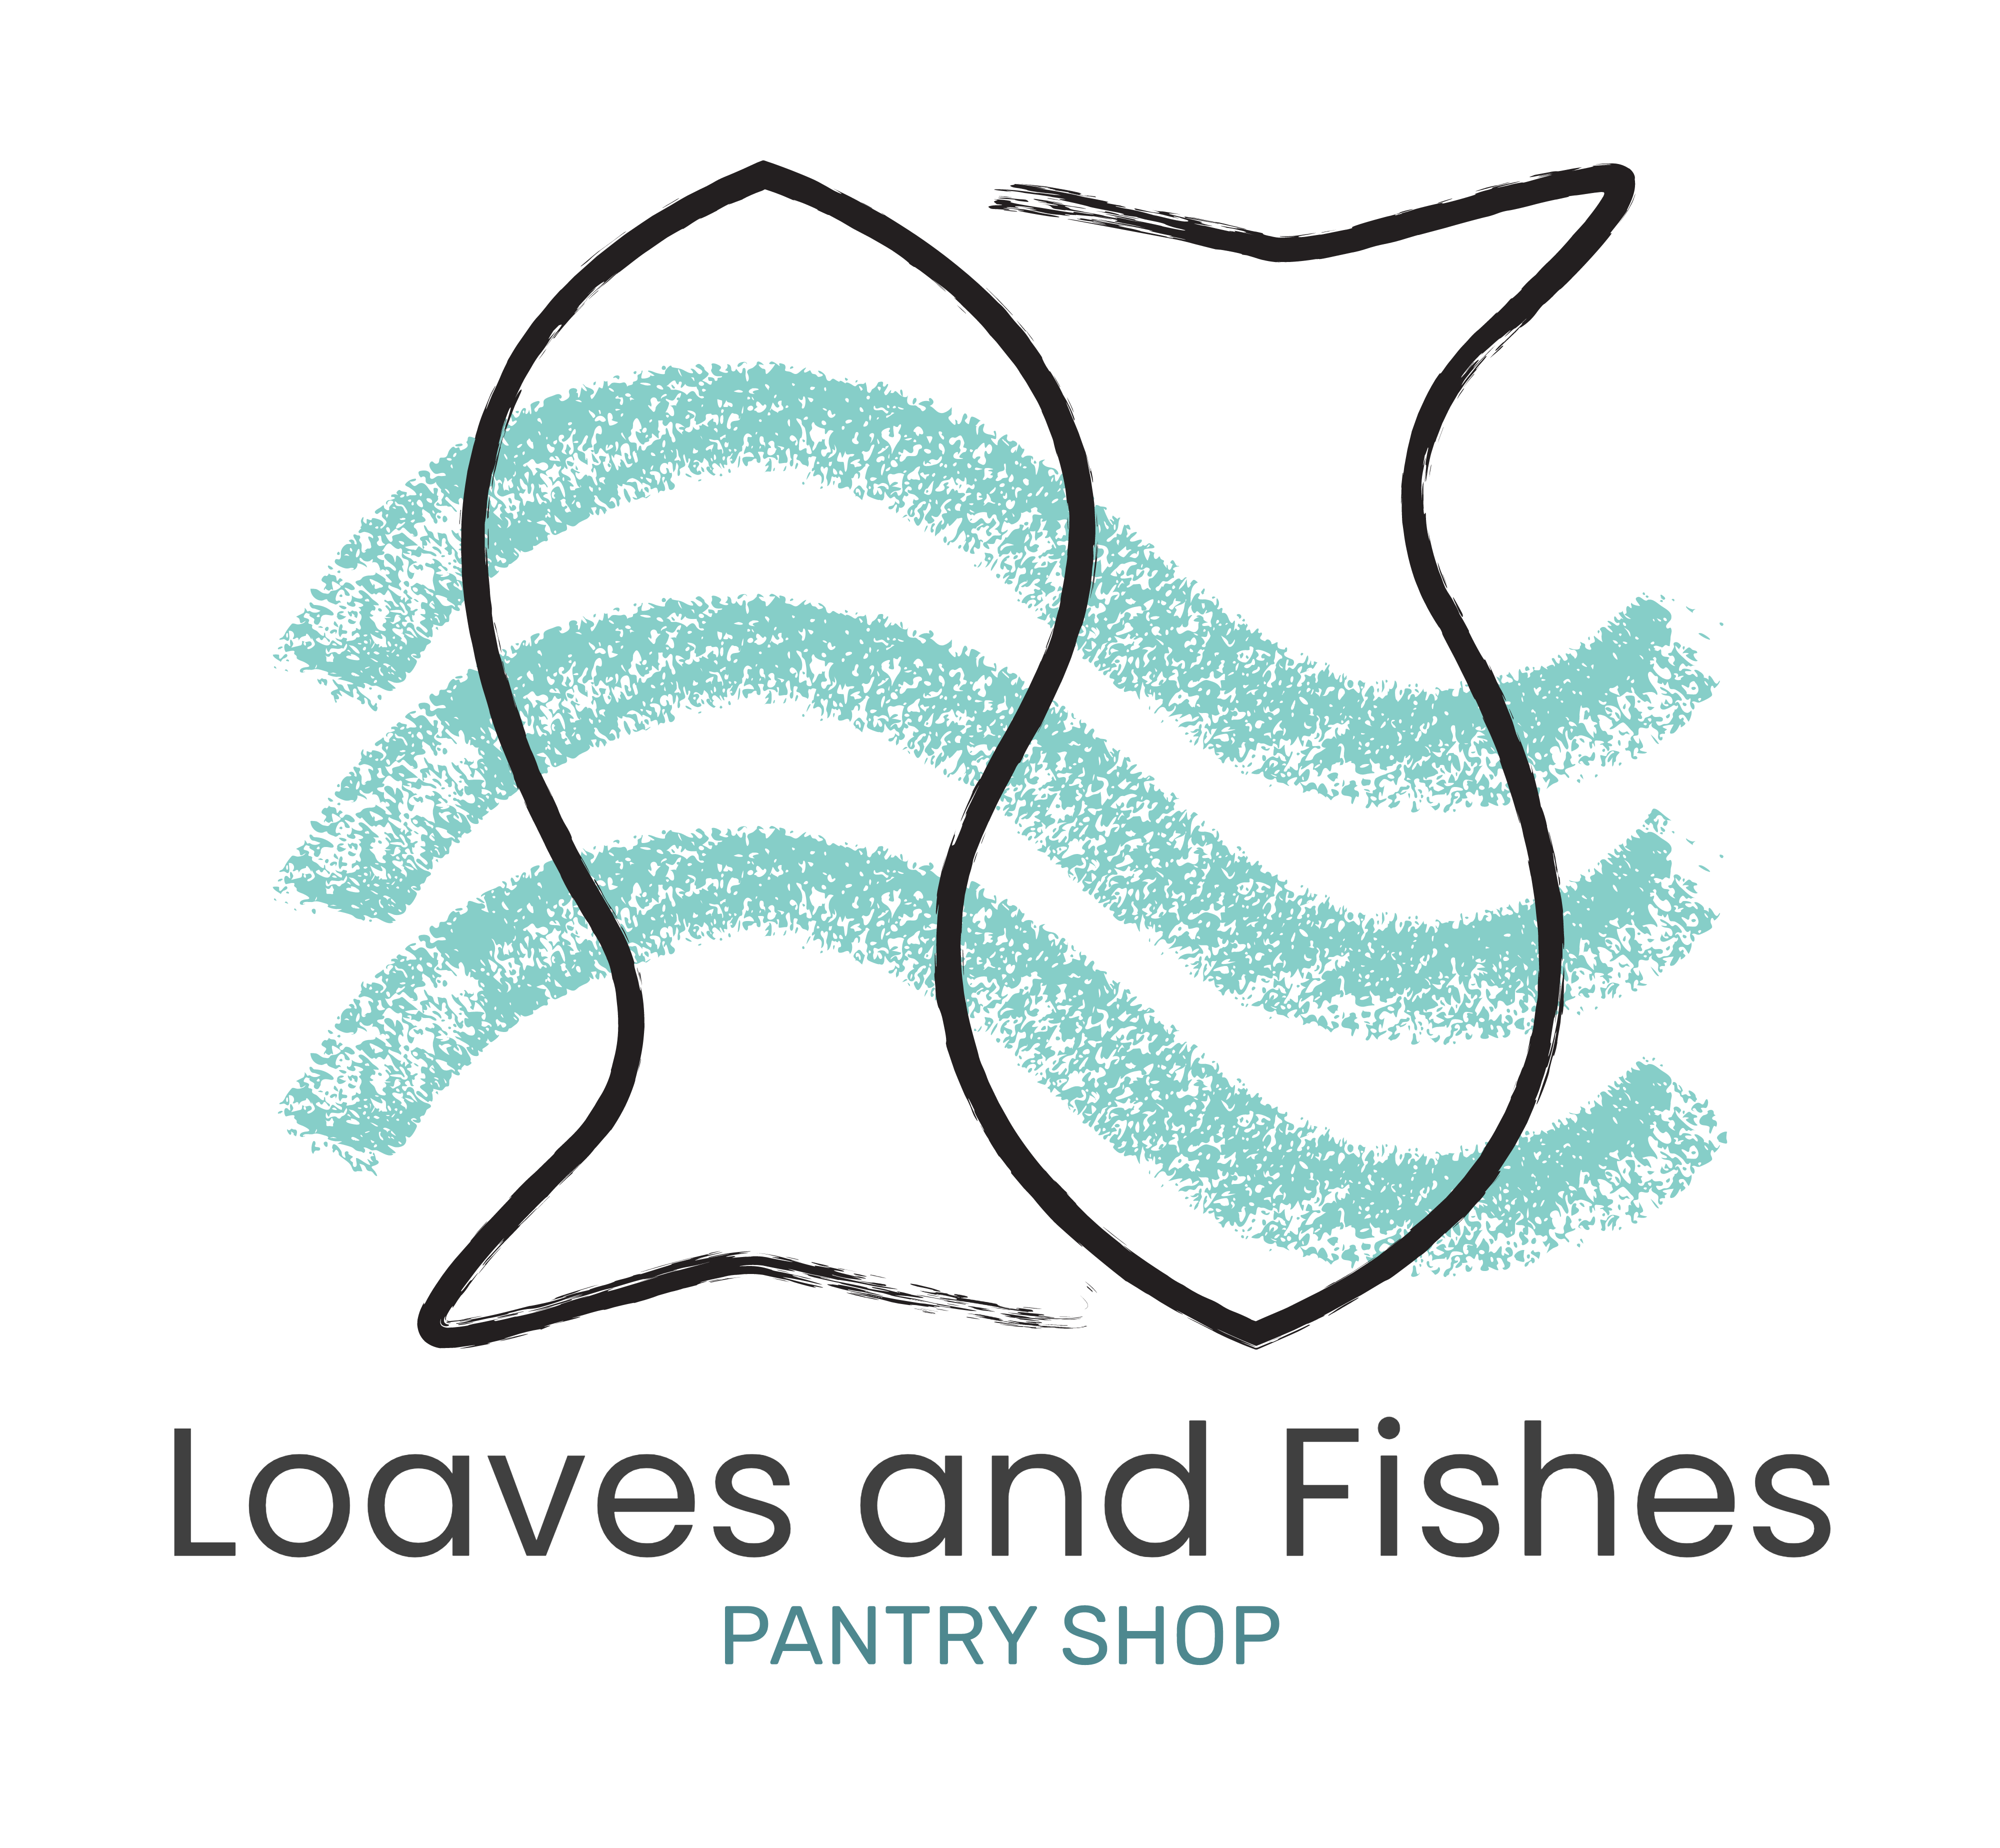 Alfreton's Loaves and Fishes Pantry Shop: What is it and how can you help?